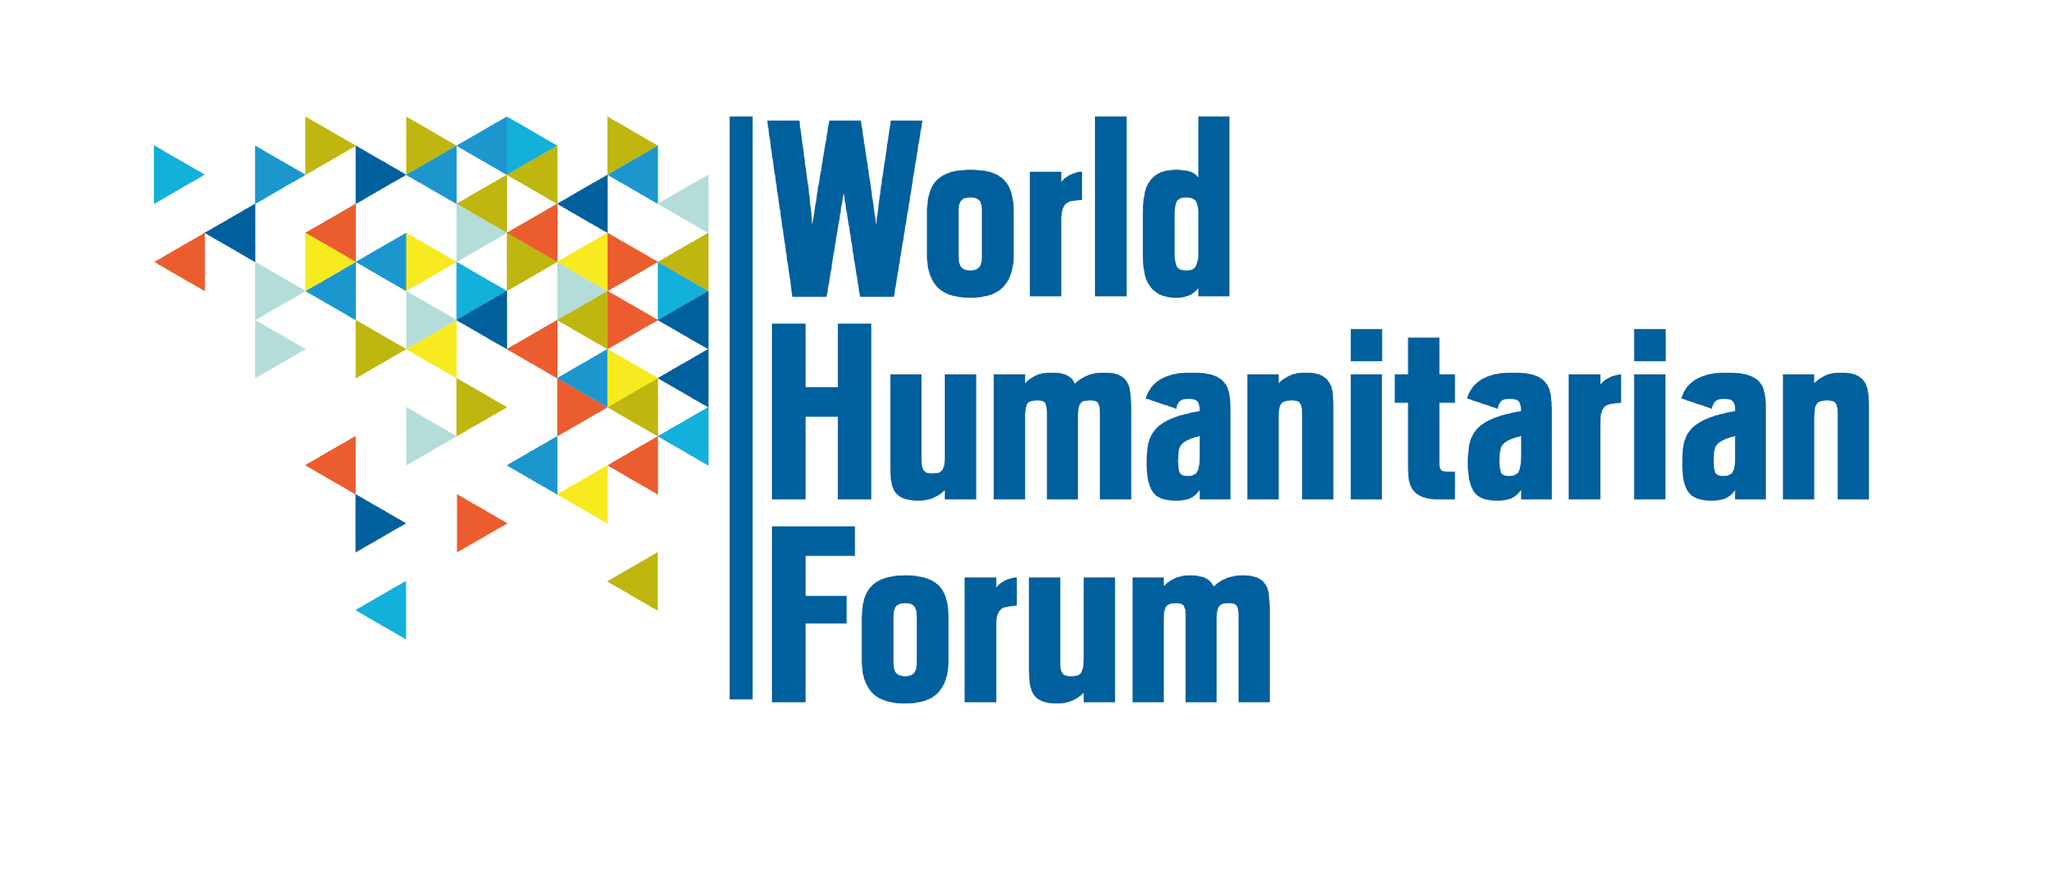 World Humanitarian Forum (WHF) is the largest and most inclusive nonpartisan forum in humanitarian aid and international development.